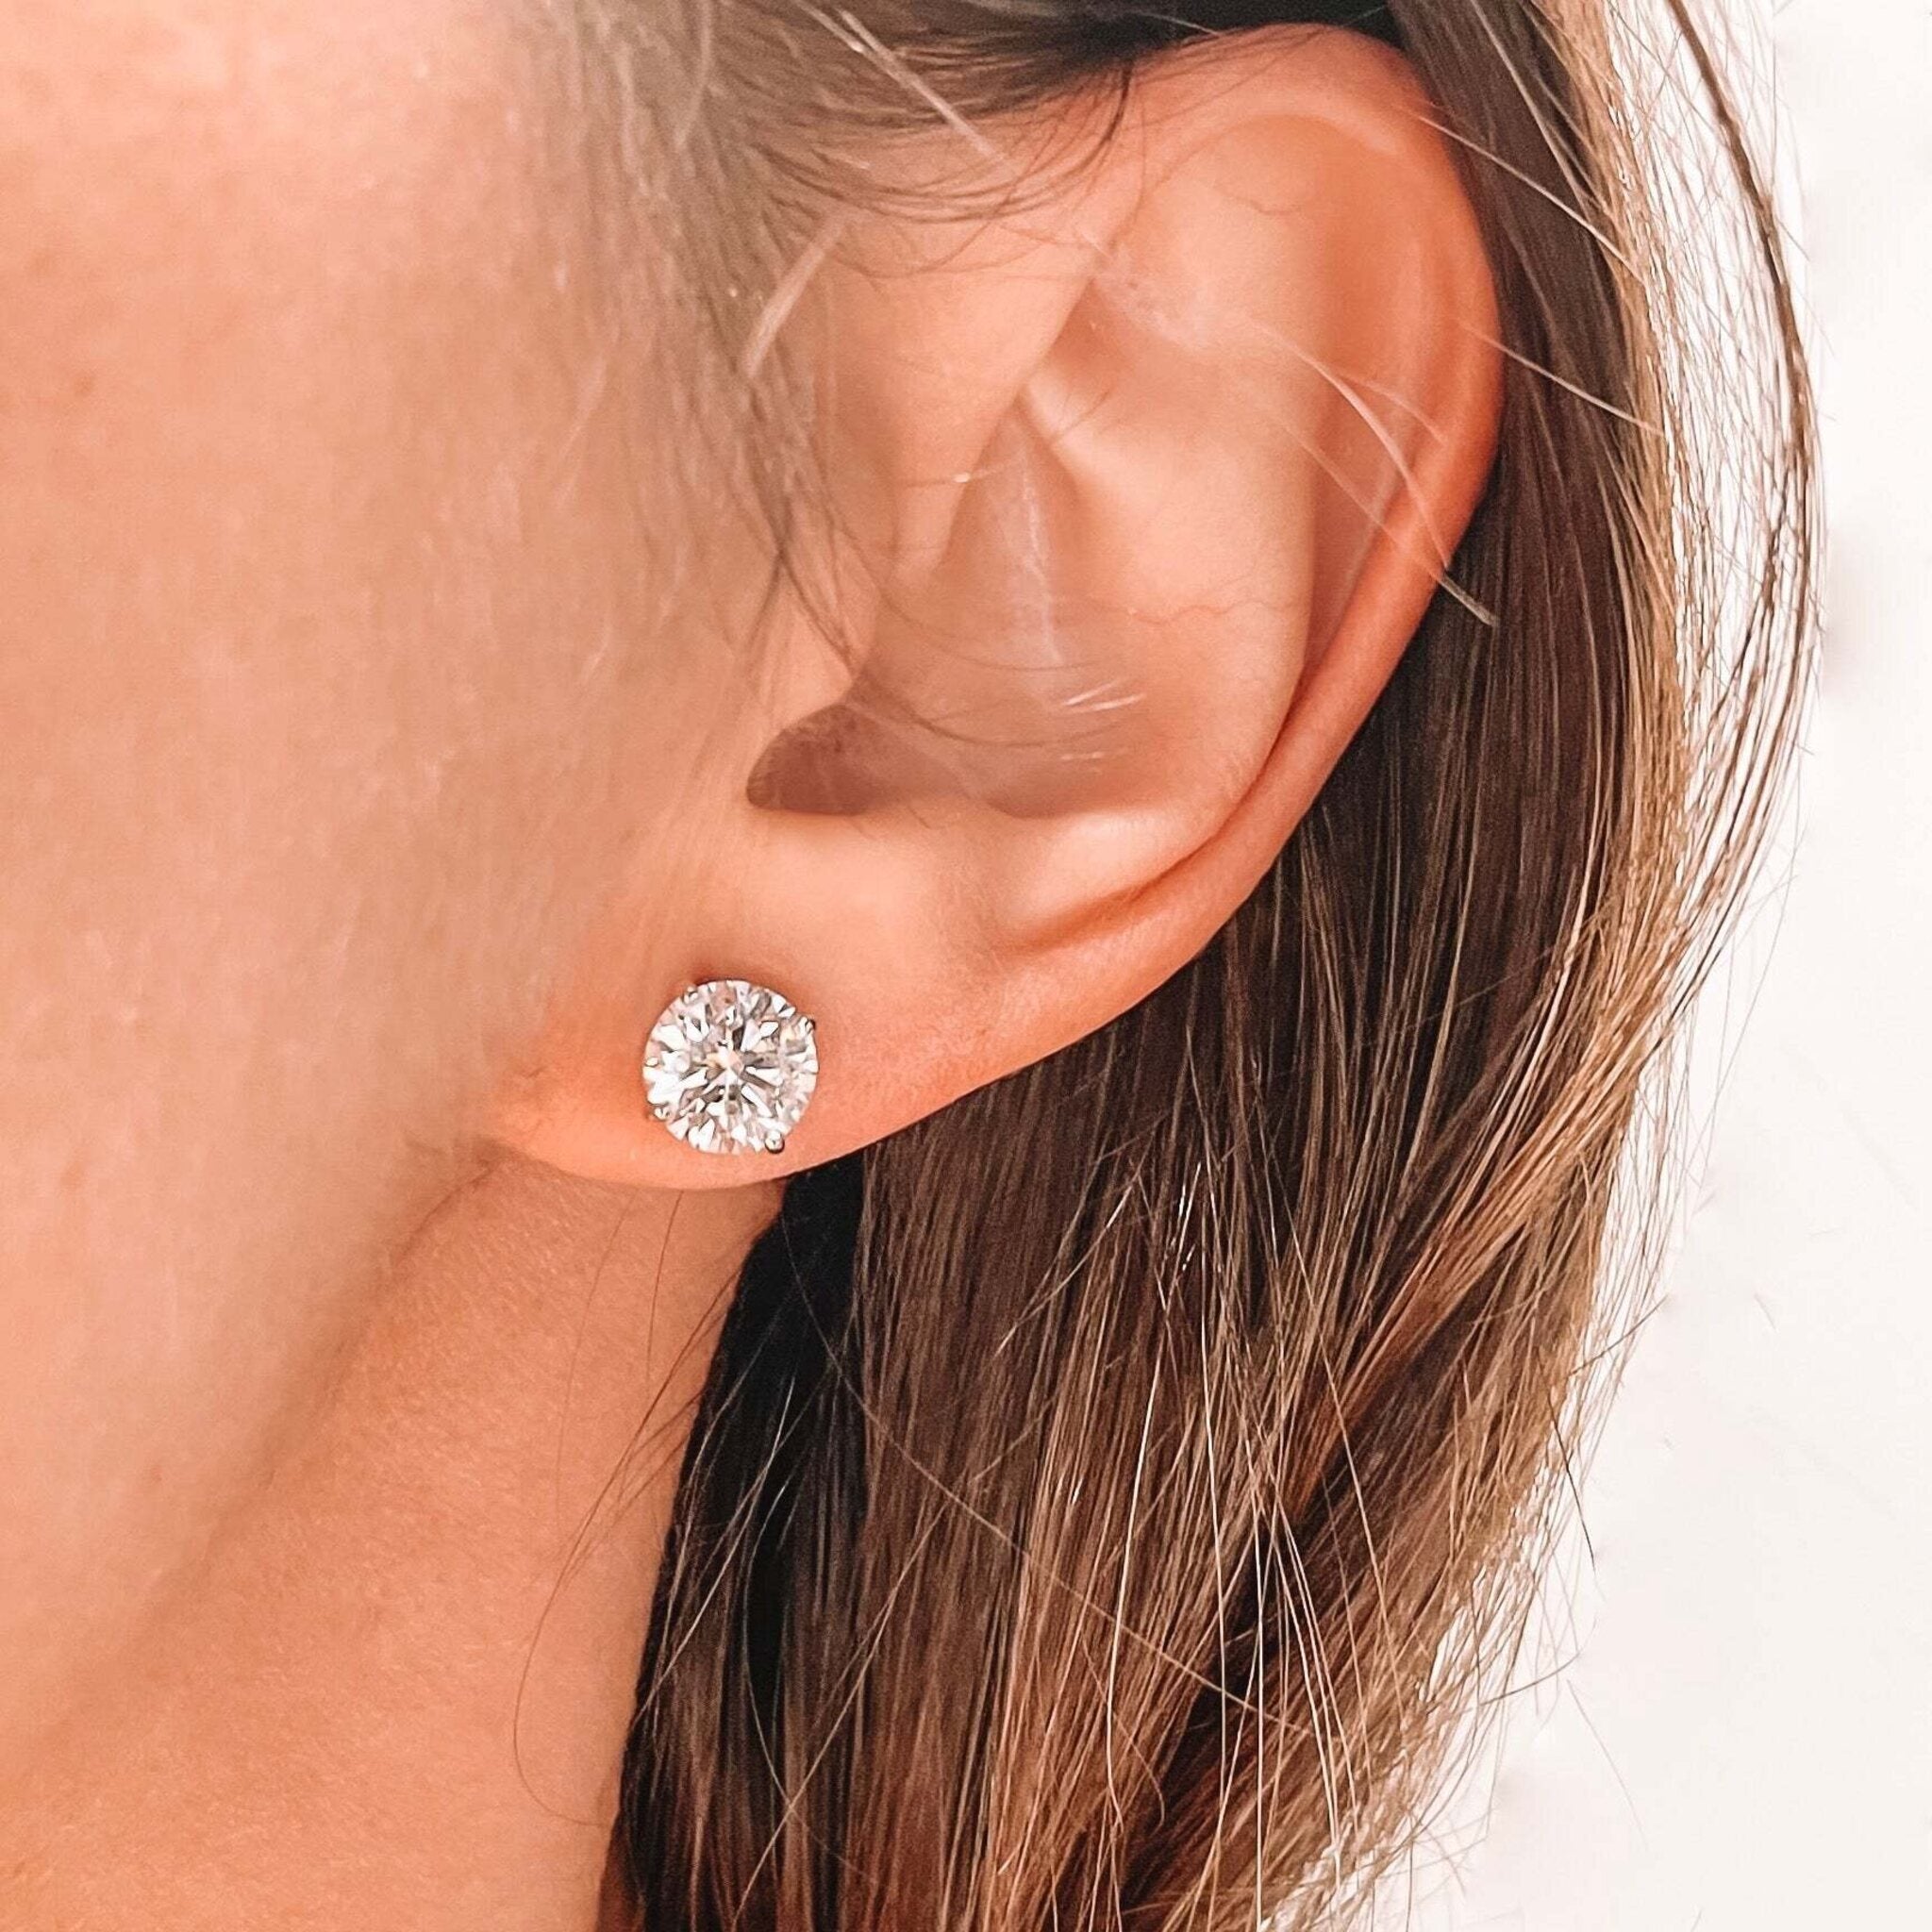 Small Solid Gold Diamond Studs  Local Eclectic – local eclectic